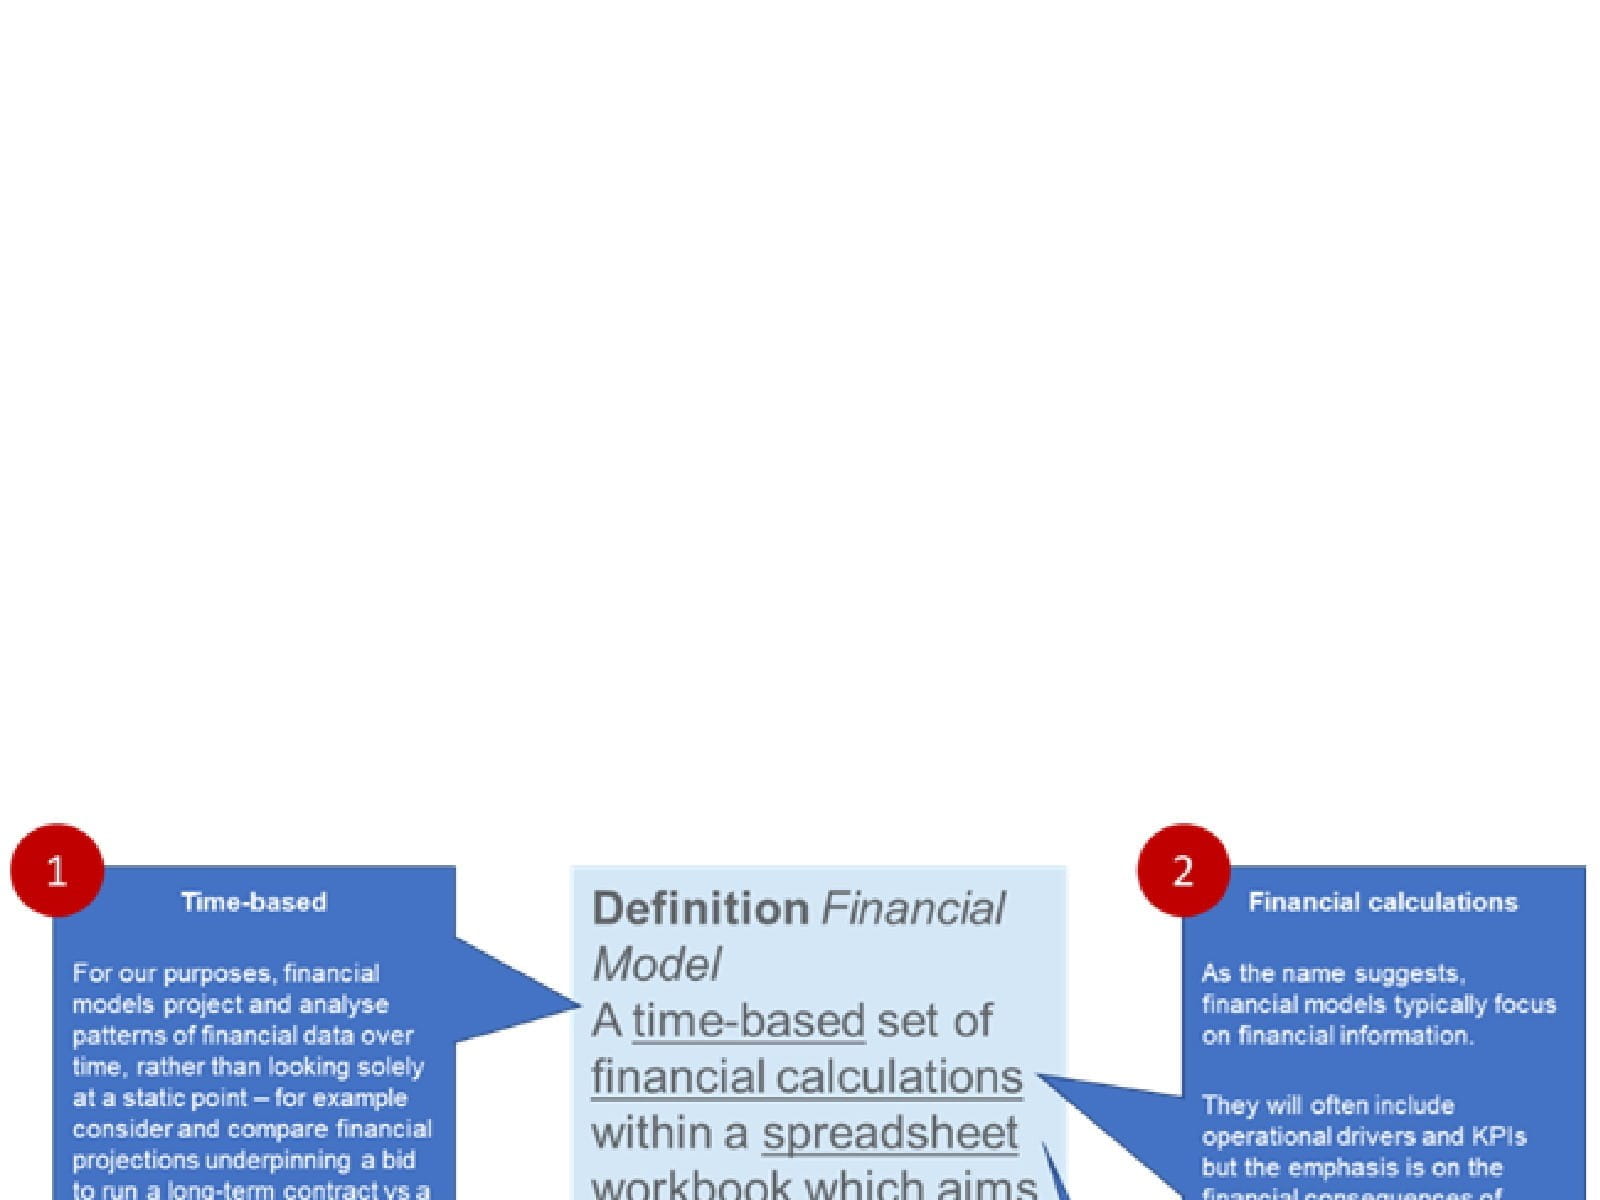 Determining what constitutes a financial model 